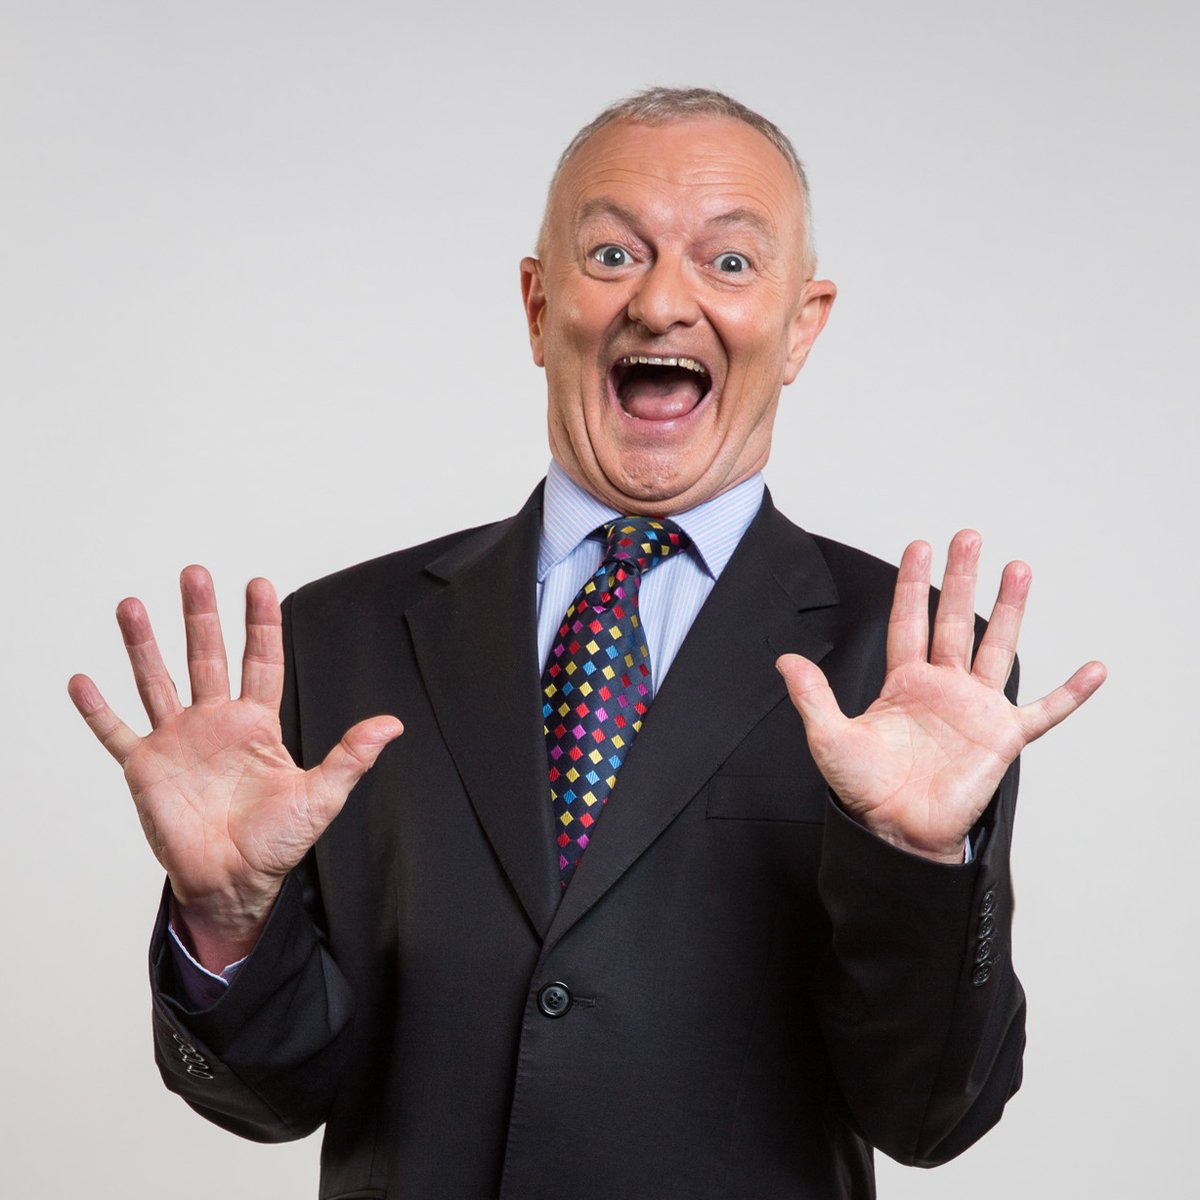 Happy Antony Green Day to all those who celebrate! #DemocracySausage #NSWvotes #NSWVotes2023 #NSWelection #NSWpol #Auspol2023